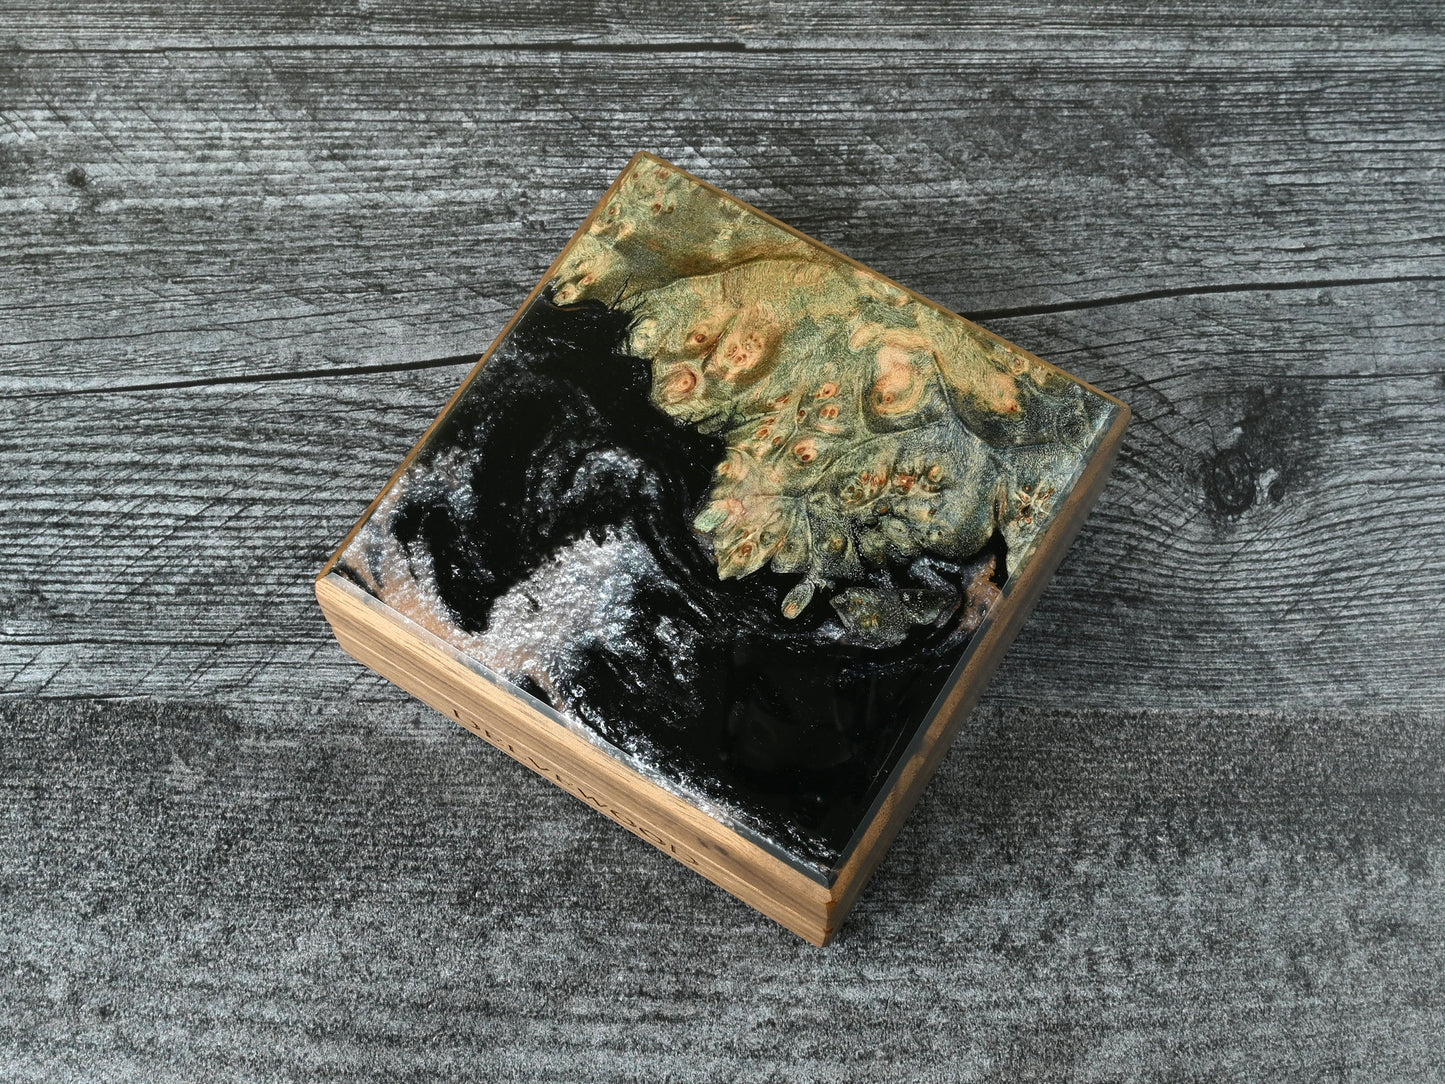 Walnut little delver dice box with green/blue maple burl top veneer and black / pearl white resin. D&D ttrpg.